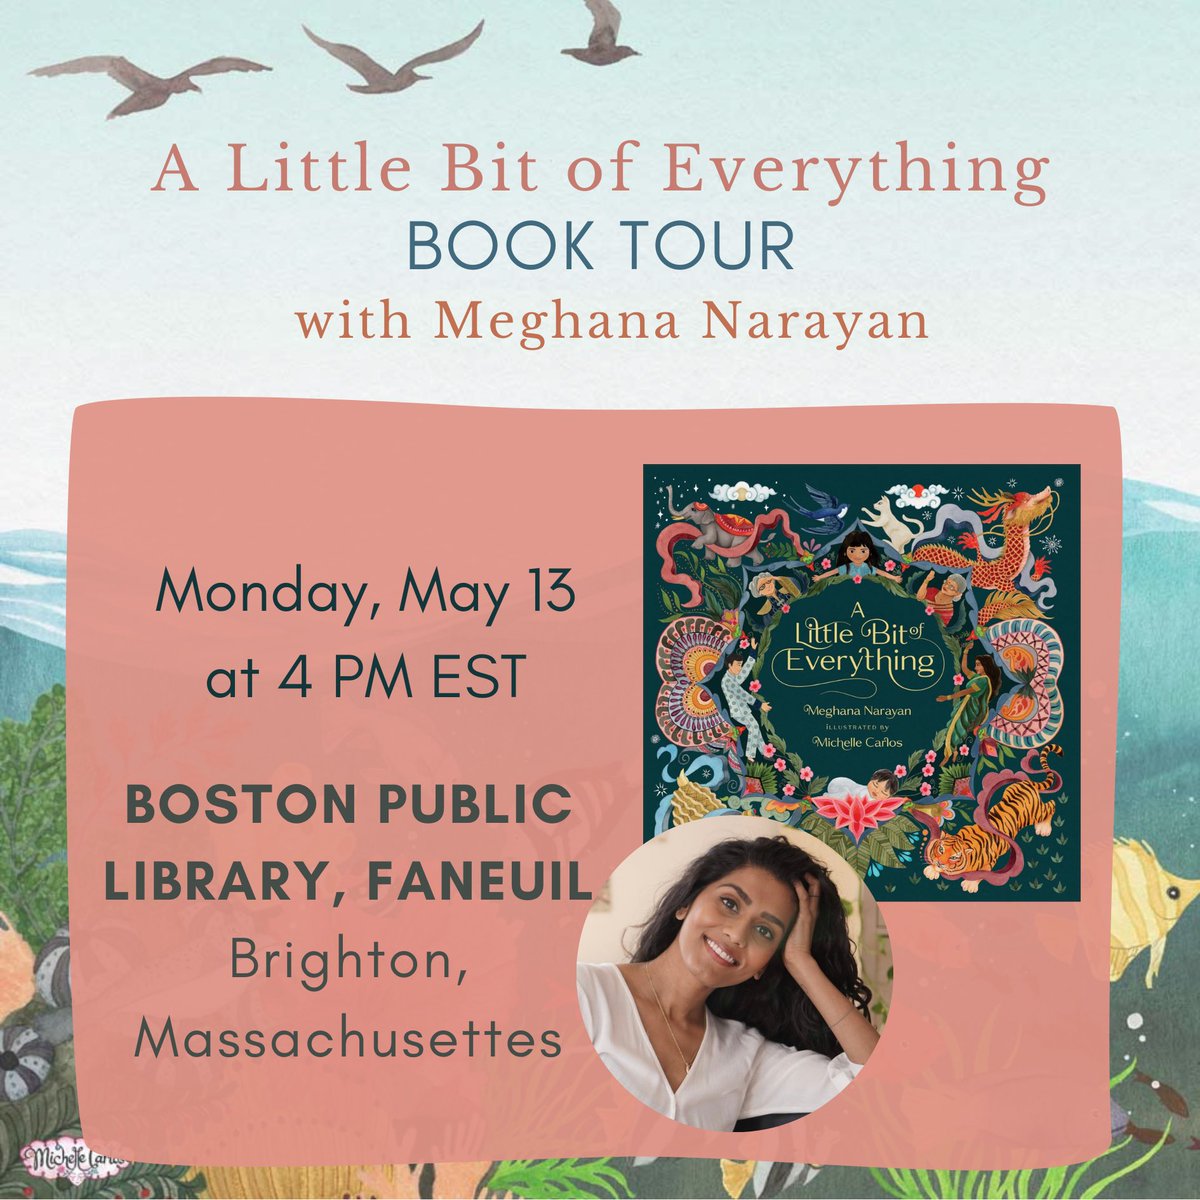 Providence was a blast! Now I’ve got some fun events in the Boston area. 

Tomorrow in Newton, Belmont for a Mother’s Day celebration, and Boston Public Library on Monday! Hope to see you there! #WritingCommmunity #debutbook #booktour #PictureBooks